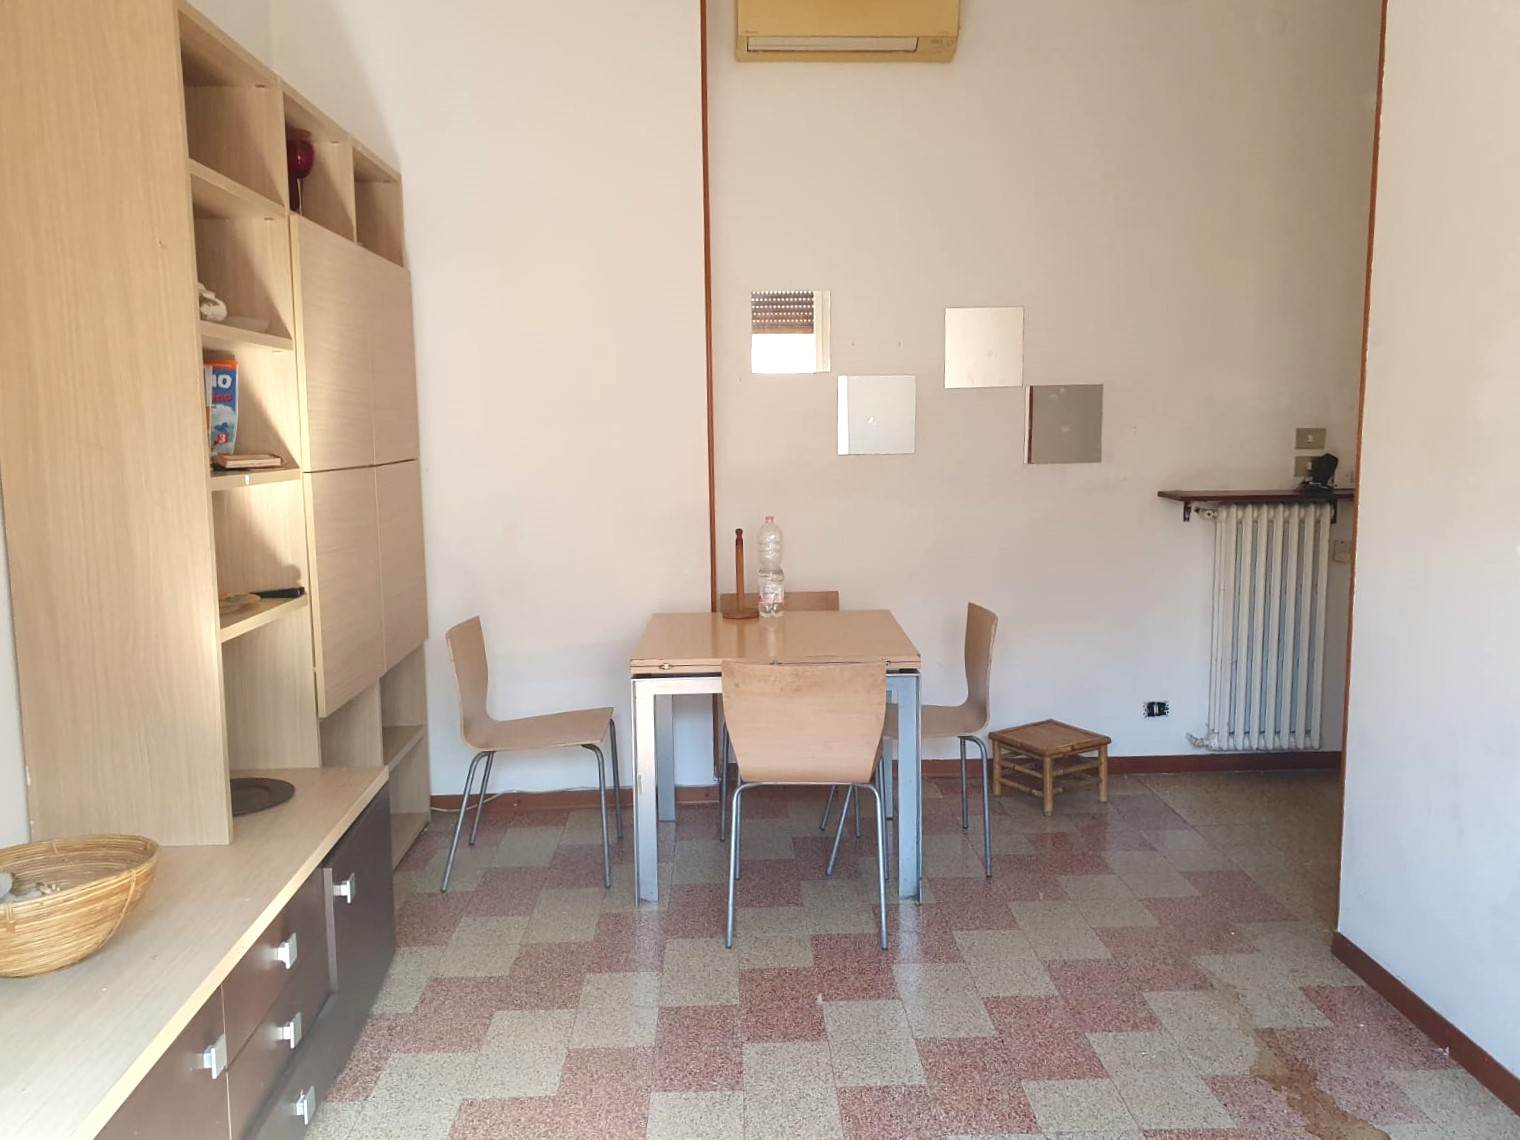 SESTO SAN GIOVANNI, Apartment for sale of 60 Sq. mt., Be restored, Heating Centralized, Energetic class: G, Epi: 175 kwh/m2 year, placed at 2° on 3, 